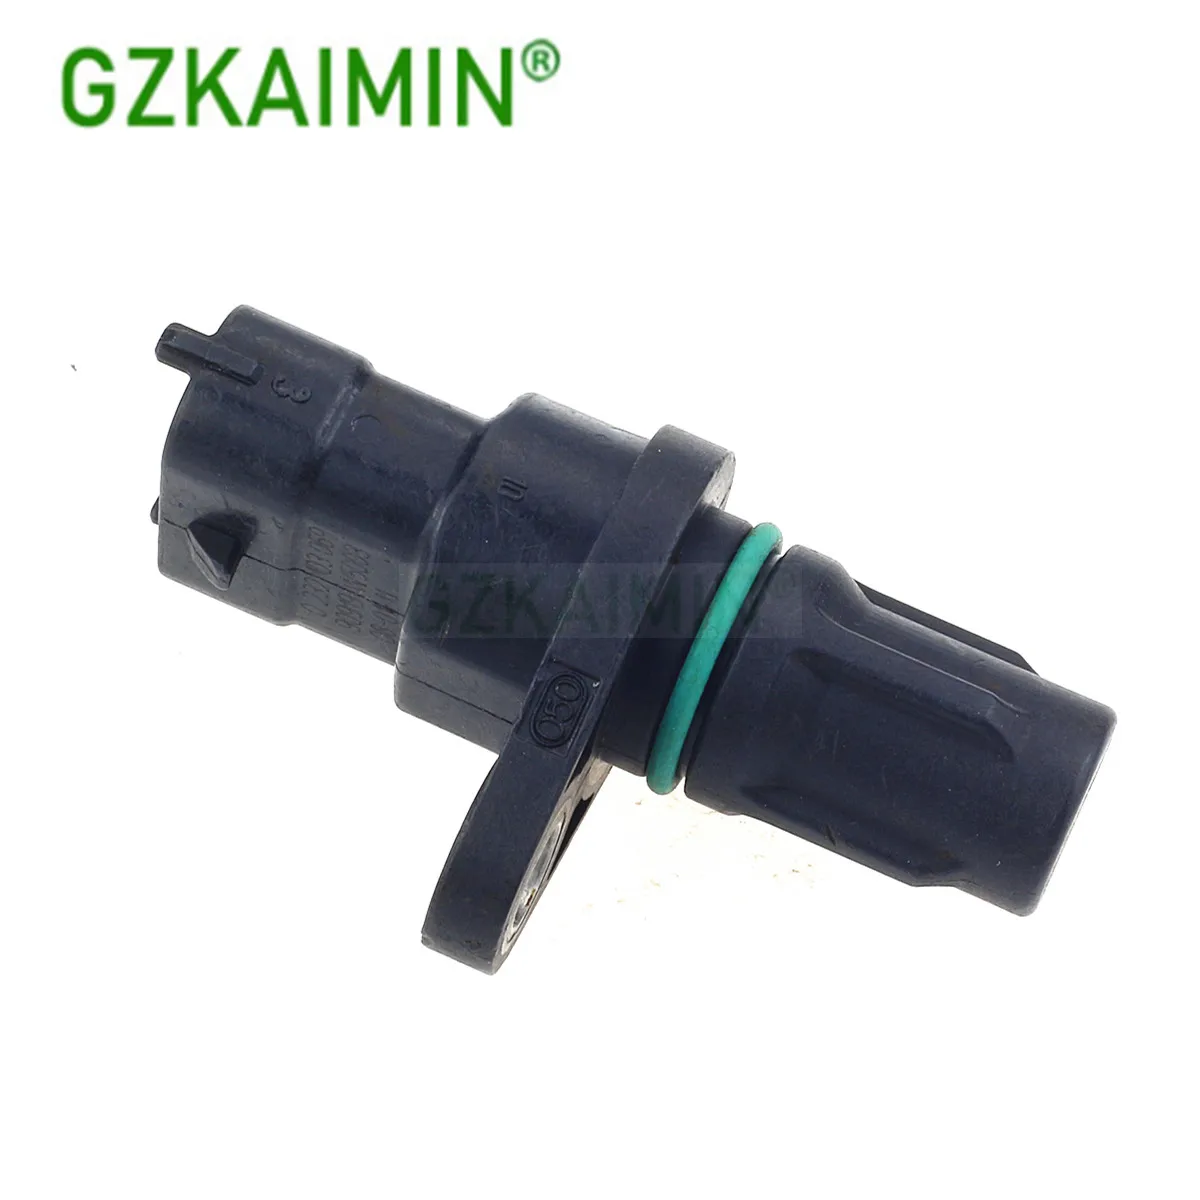 

Top Qaulity 90919W5003 90919-W5003 0232103069 Camshaft Position Sensor For TOYOTA VITZ for PEUGEOT 107 for TOYOTA AYGO 1.0 .